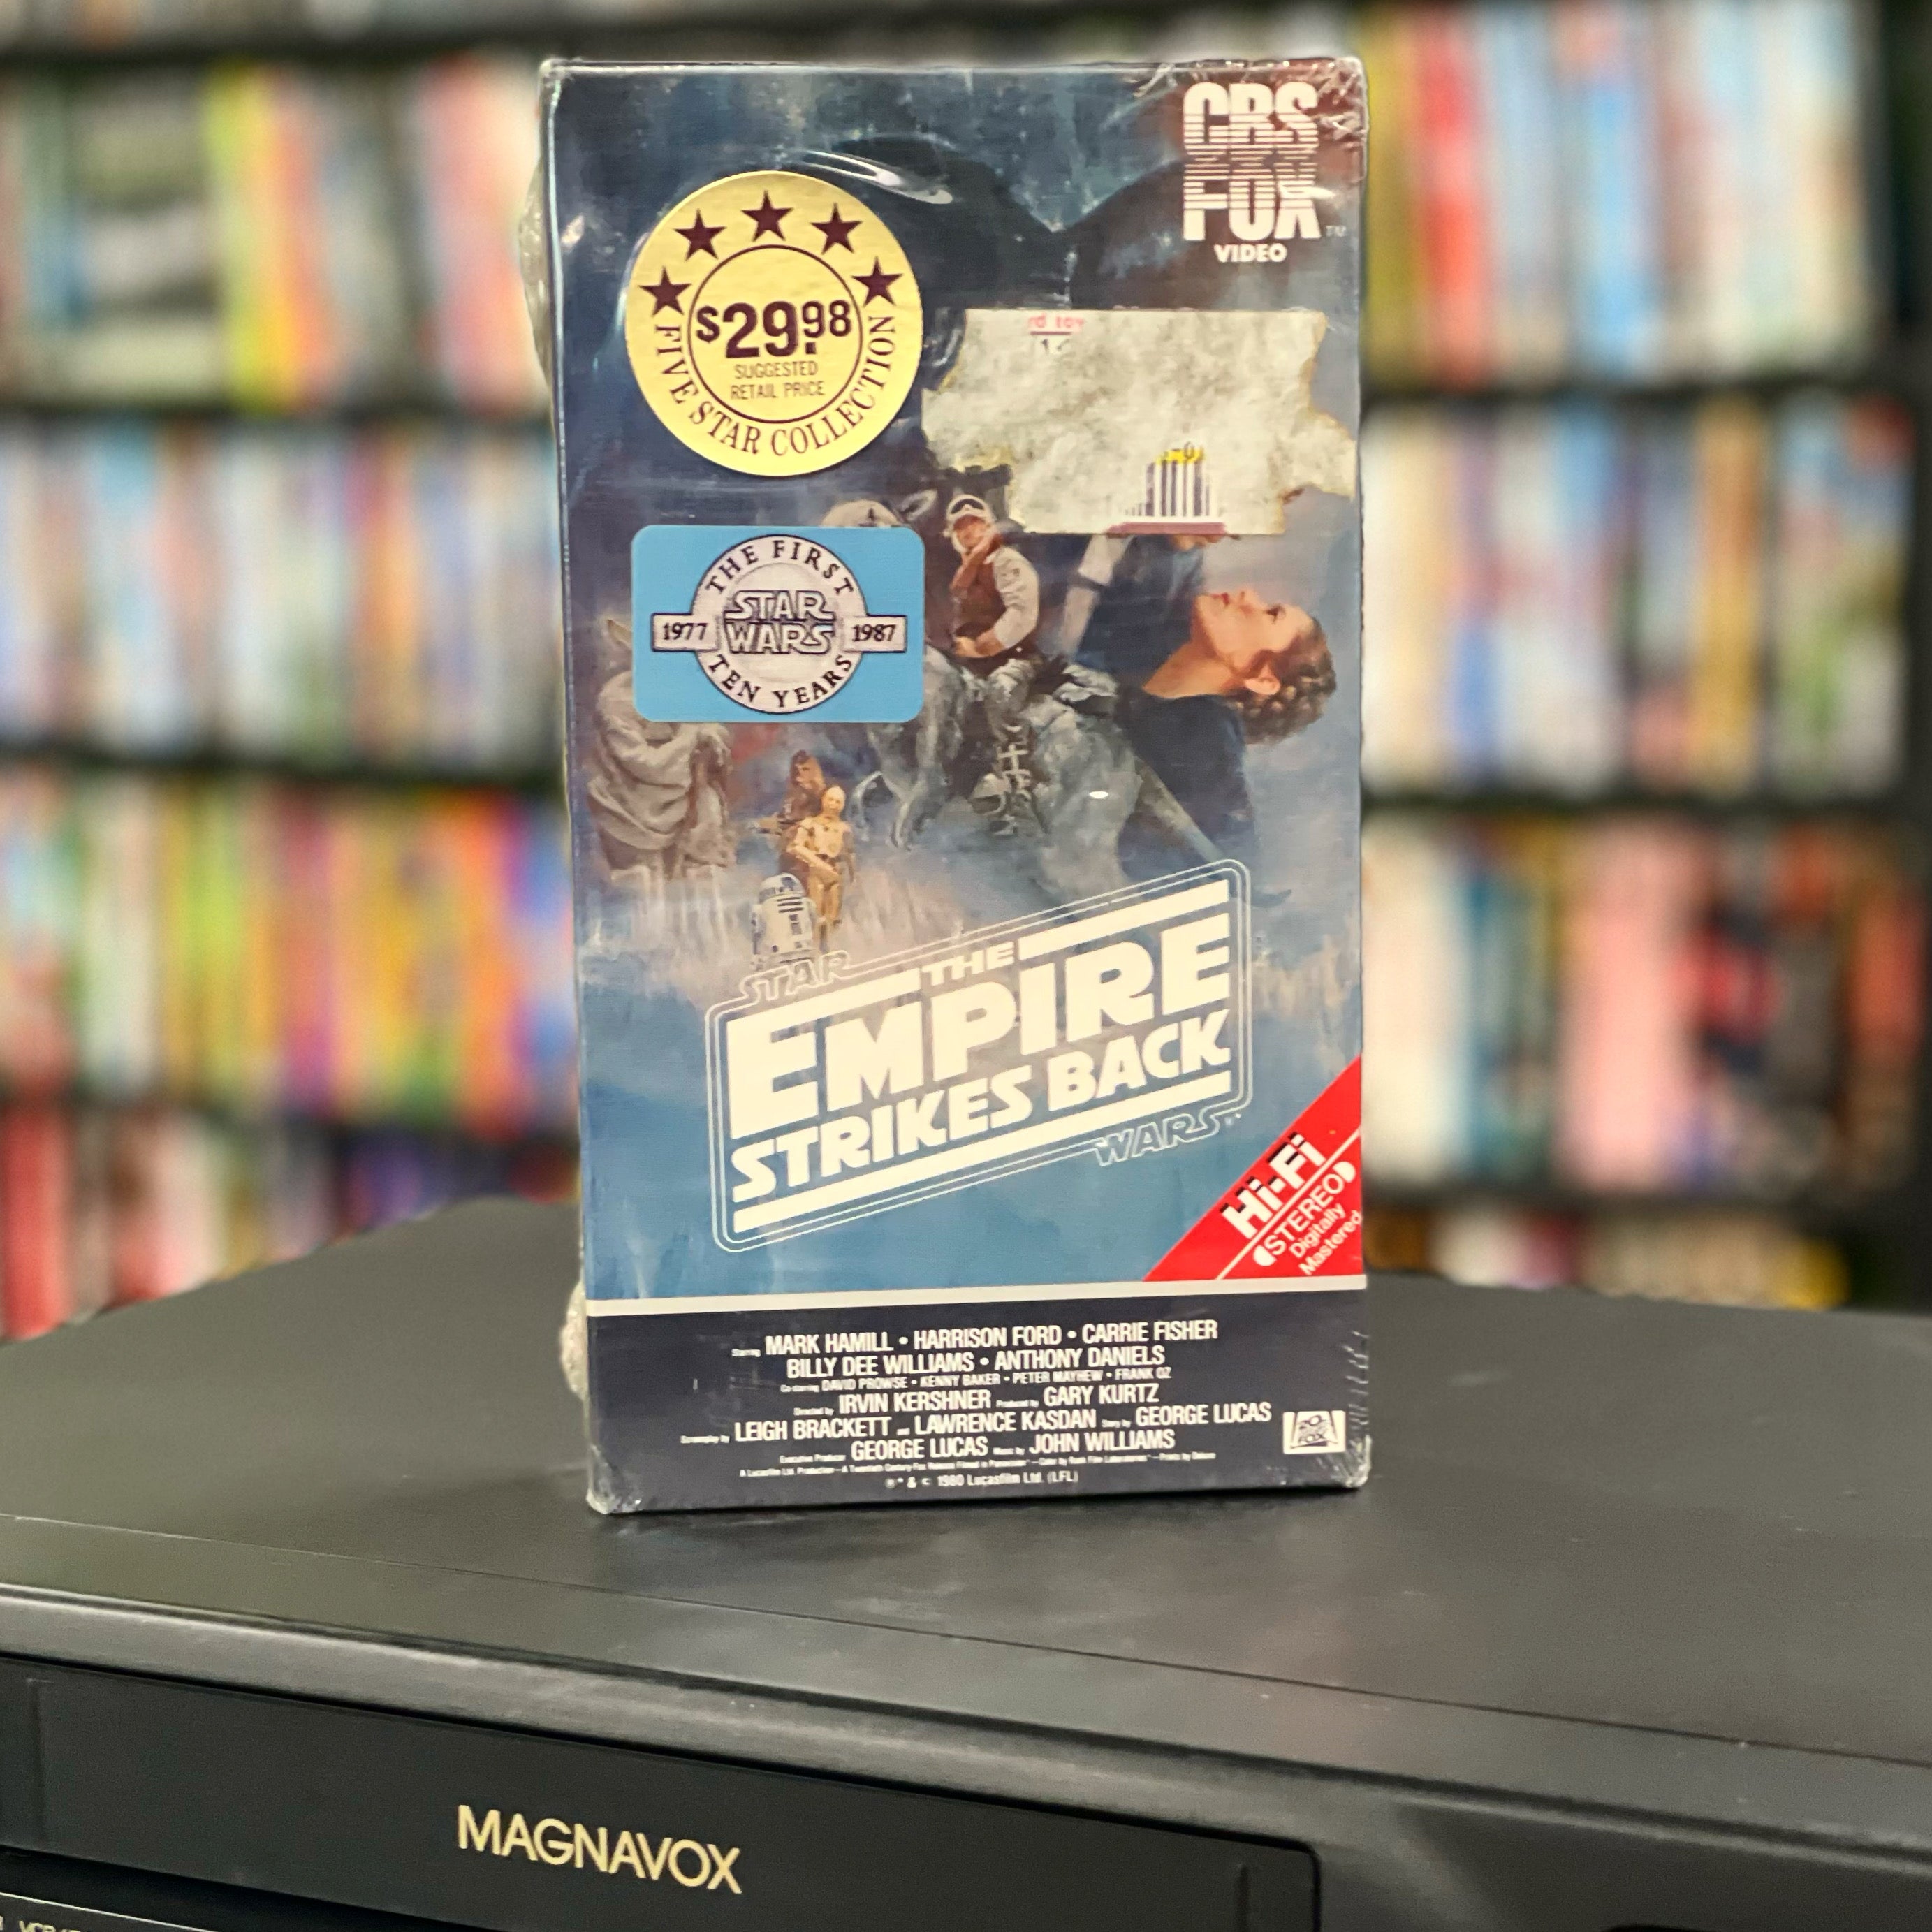 Star Wars: The Empire Strikes Back (SEALED CBS Fox Video w/ hype stickers) - Darkside Records